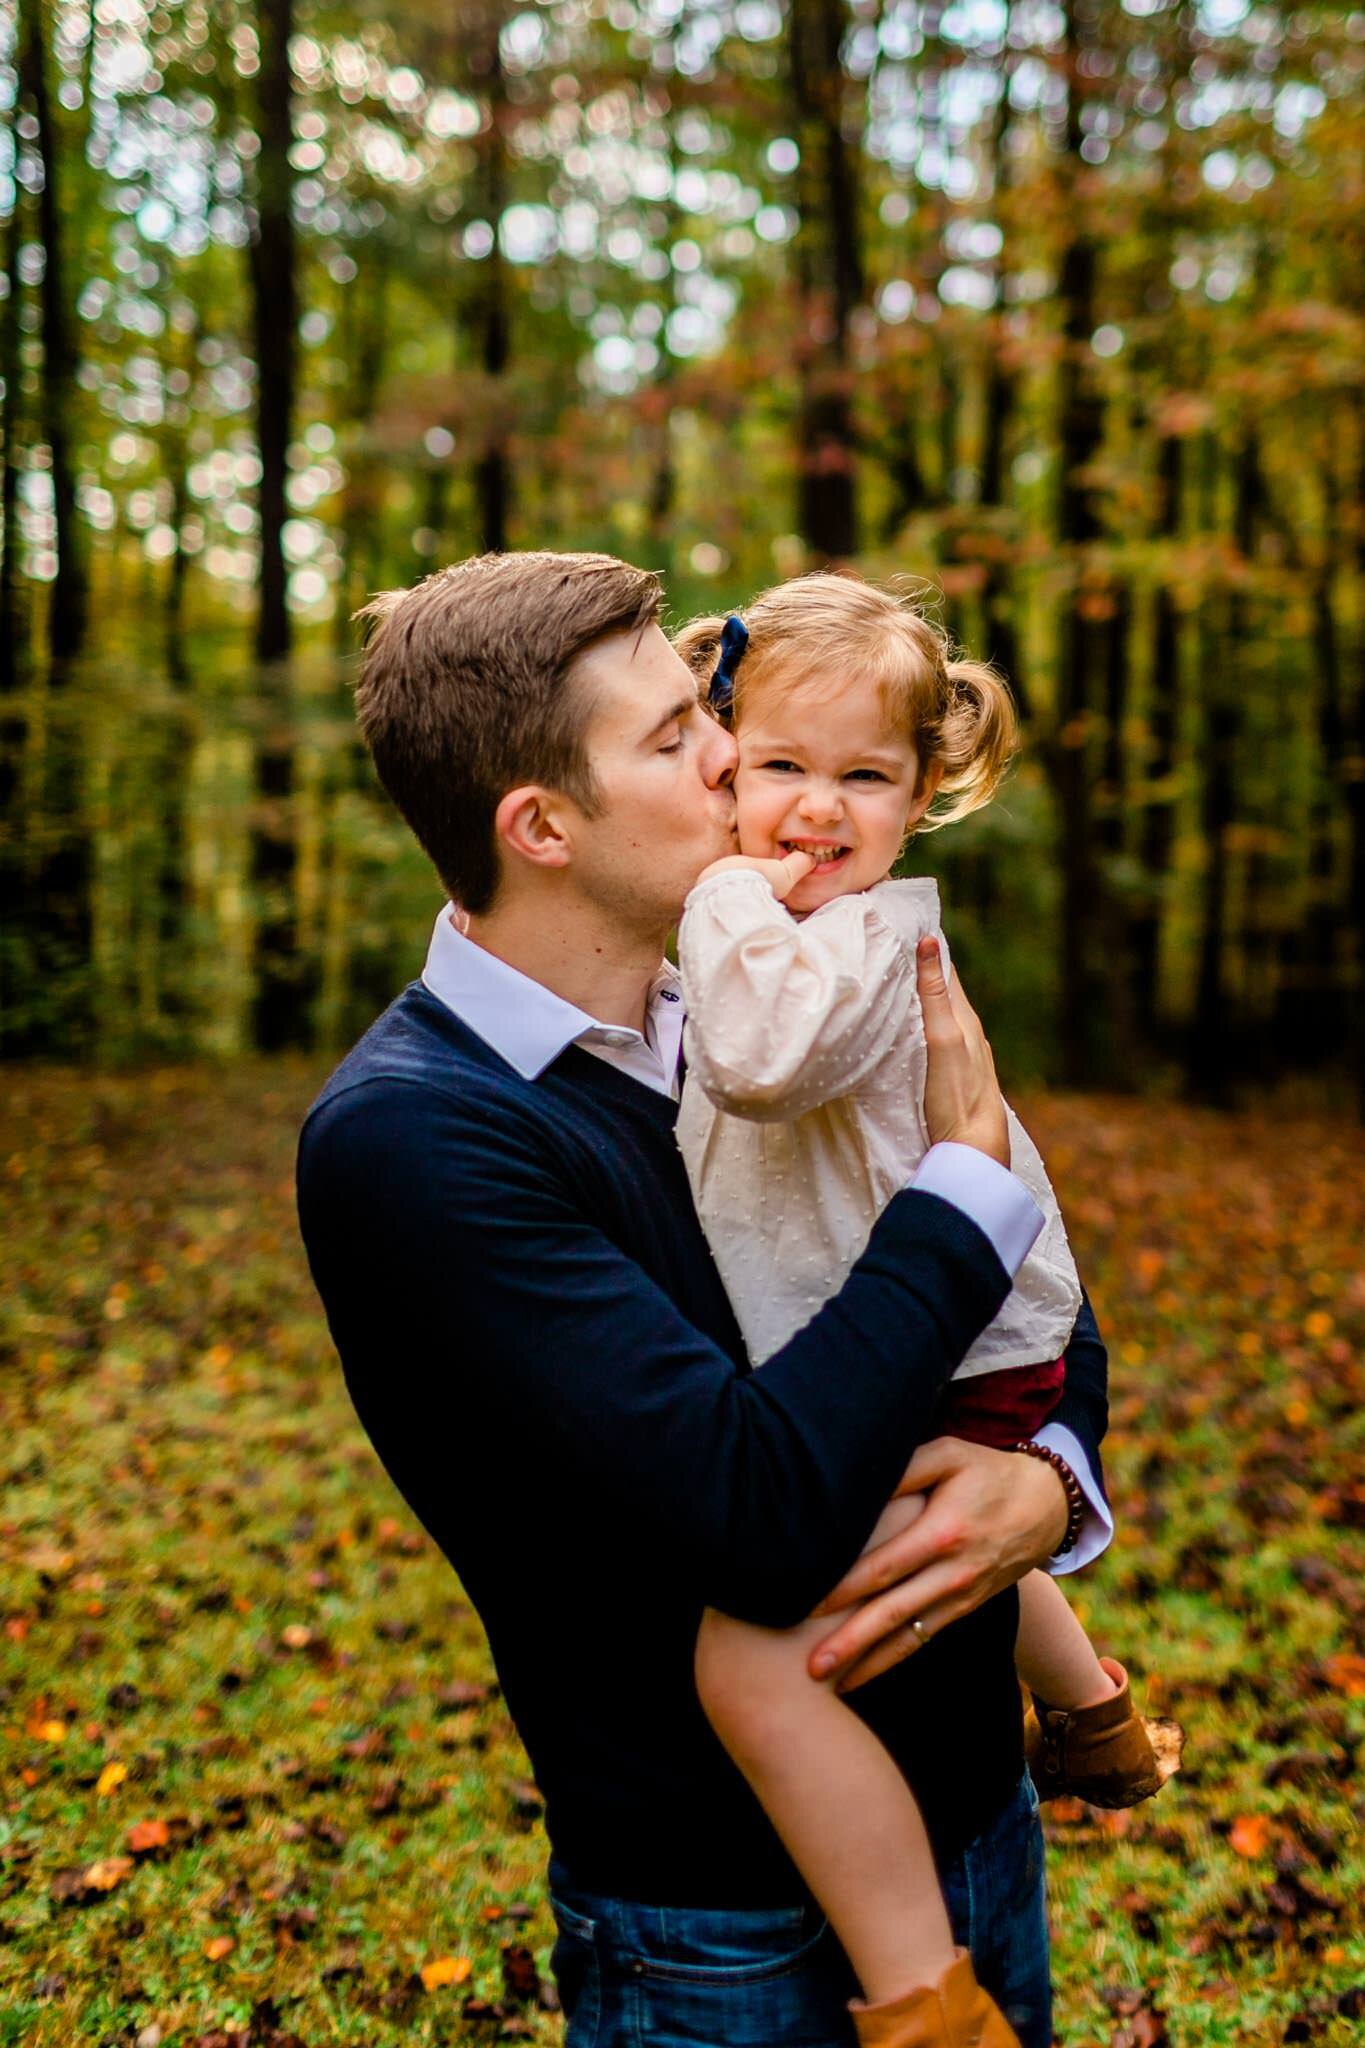 Raleigh Family Photographer | By G. Lin Photography | Umstead Park | Dad giving kiss to young daughter